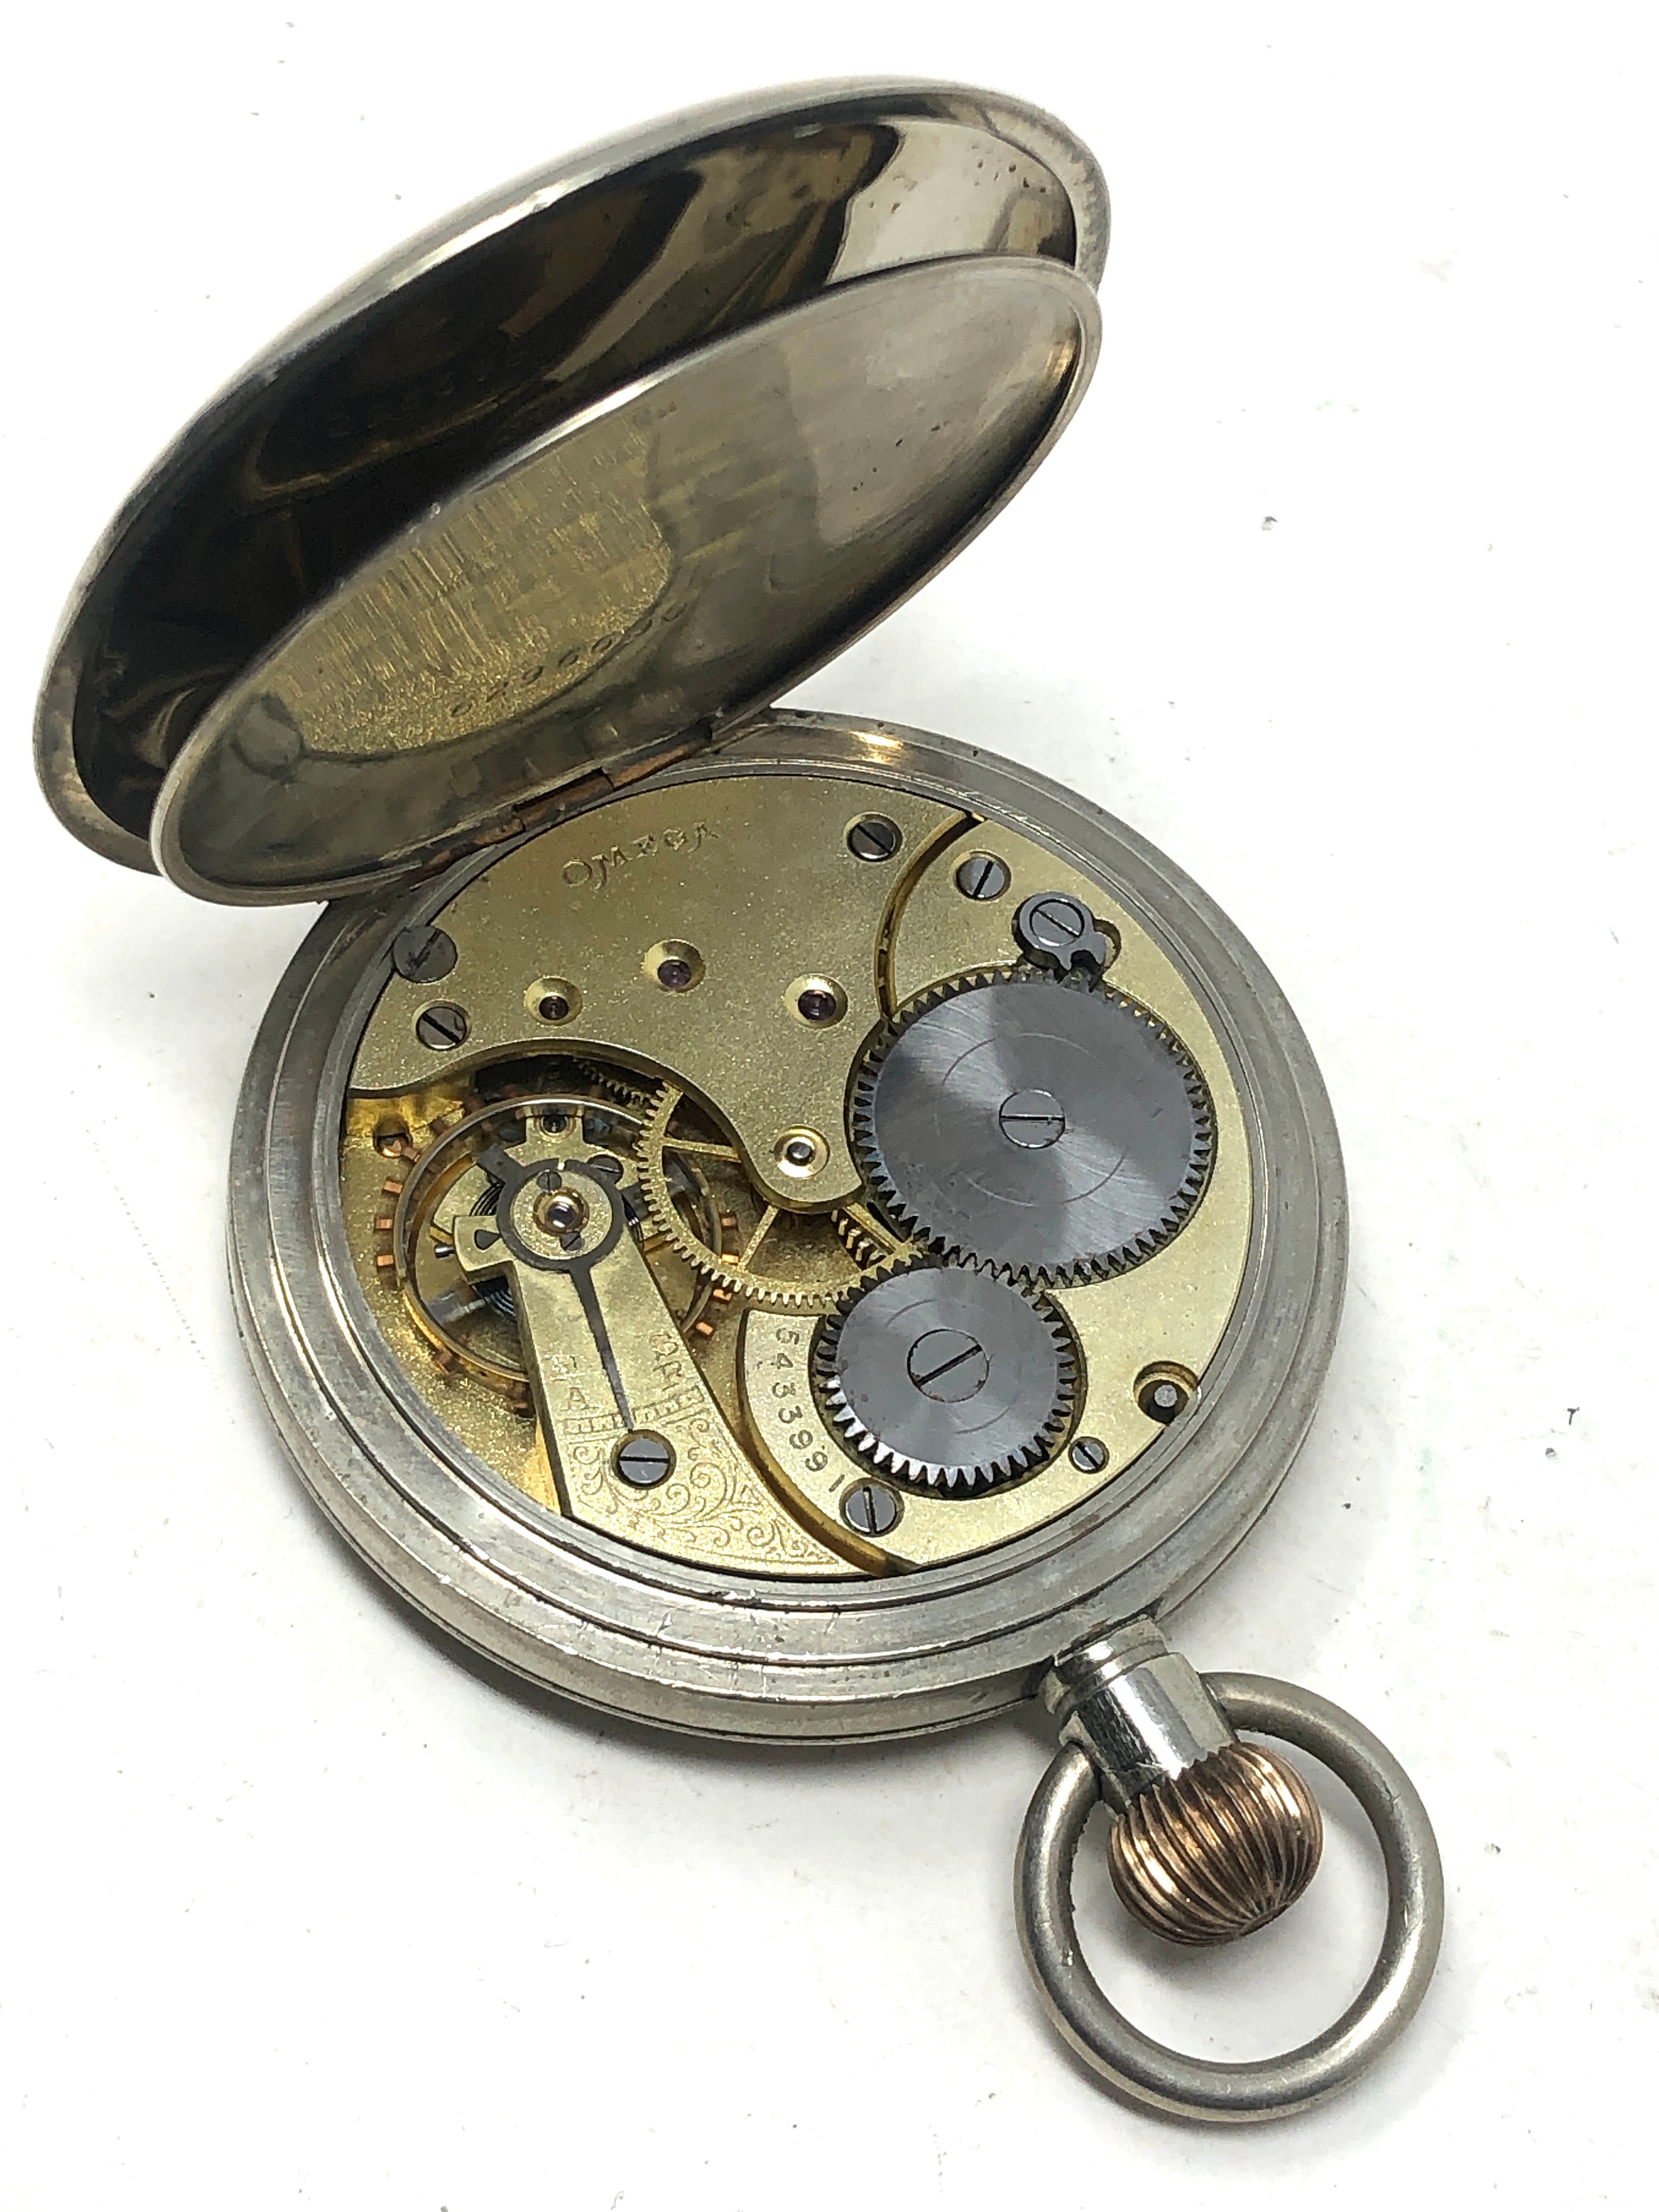 Antique open face pocket watch omega the watch is not ticking - Image 3 of 3